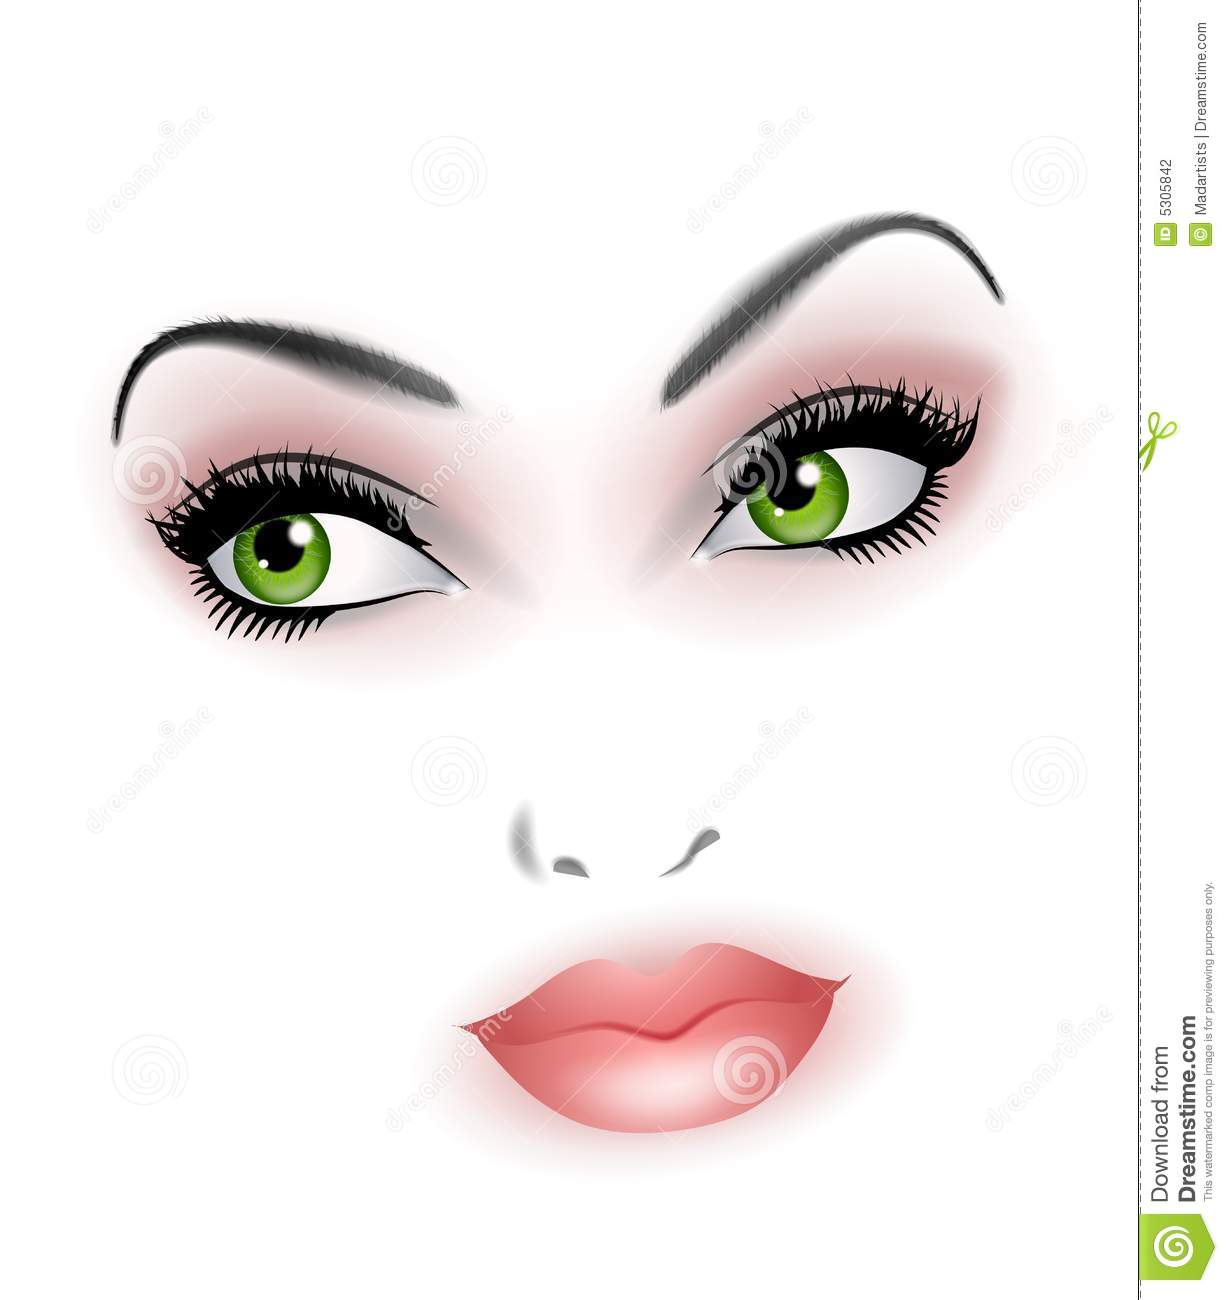 Clip Art Illustration Featuring The Facial Features Of A Beautiful